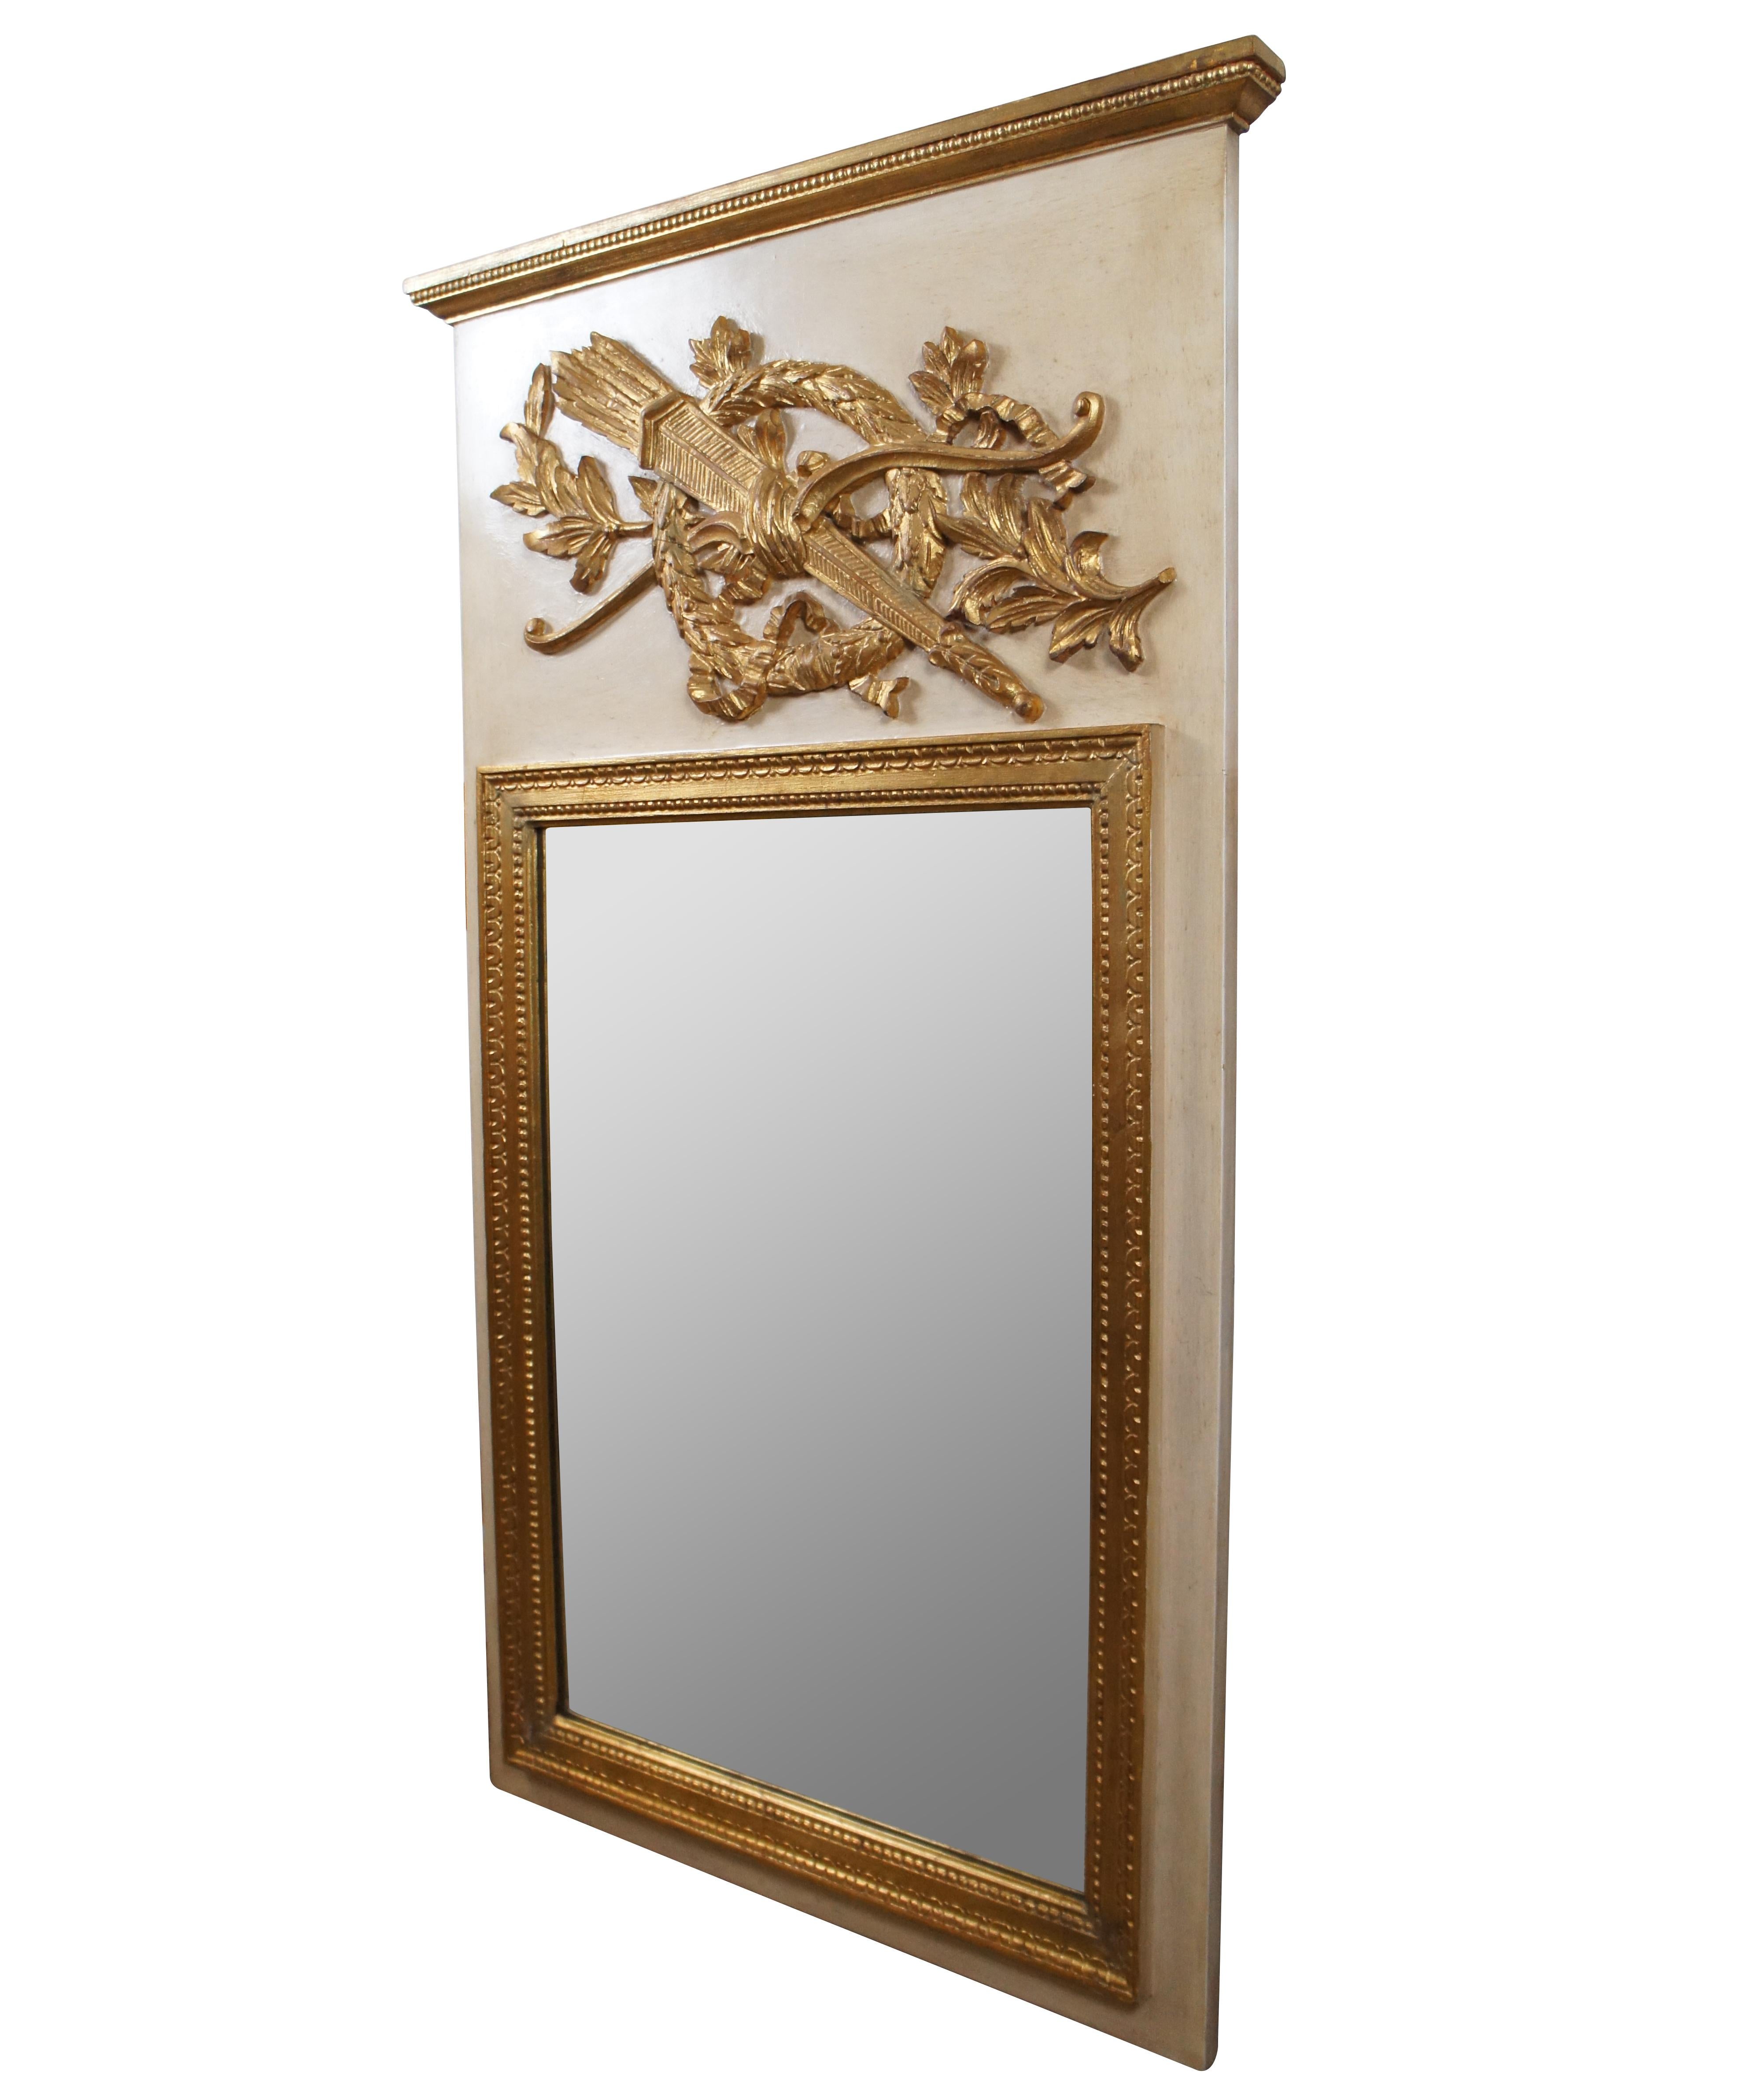 Late 20th century Baker Furniture number 3033 Louis XVI style trumeau mirror, made in Italy with a hardwood frame, painted in cream with giltwood mirror frame, pediment and medallion in the shape of a bow and quiver of arrows interlocked with a